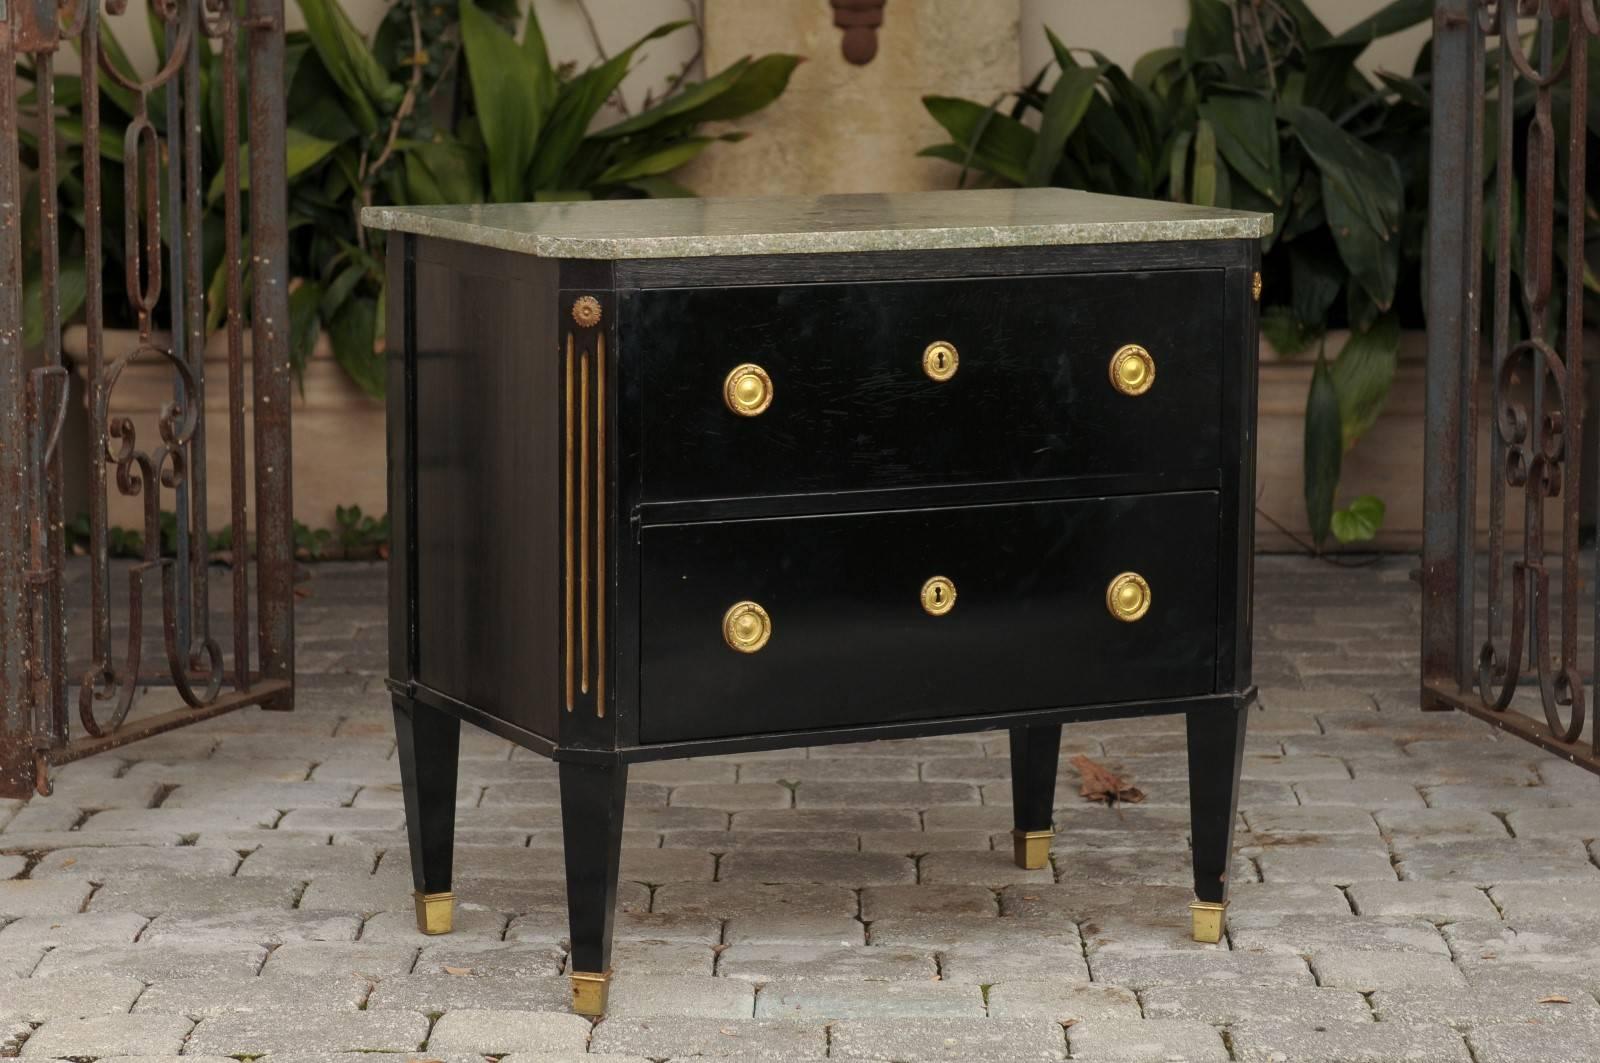 An elegant 19th century Austrian Biedermeier parcel-gilt and ebonized petite chest of drawers presenting a rectangular grey marble top with slanted corners above two drawers resting on tapered legs and brass feet. This chest features canted corners